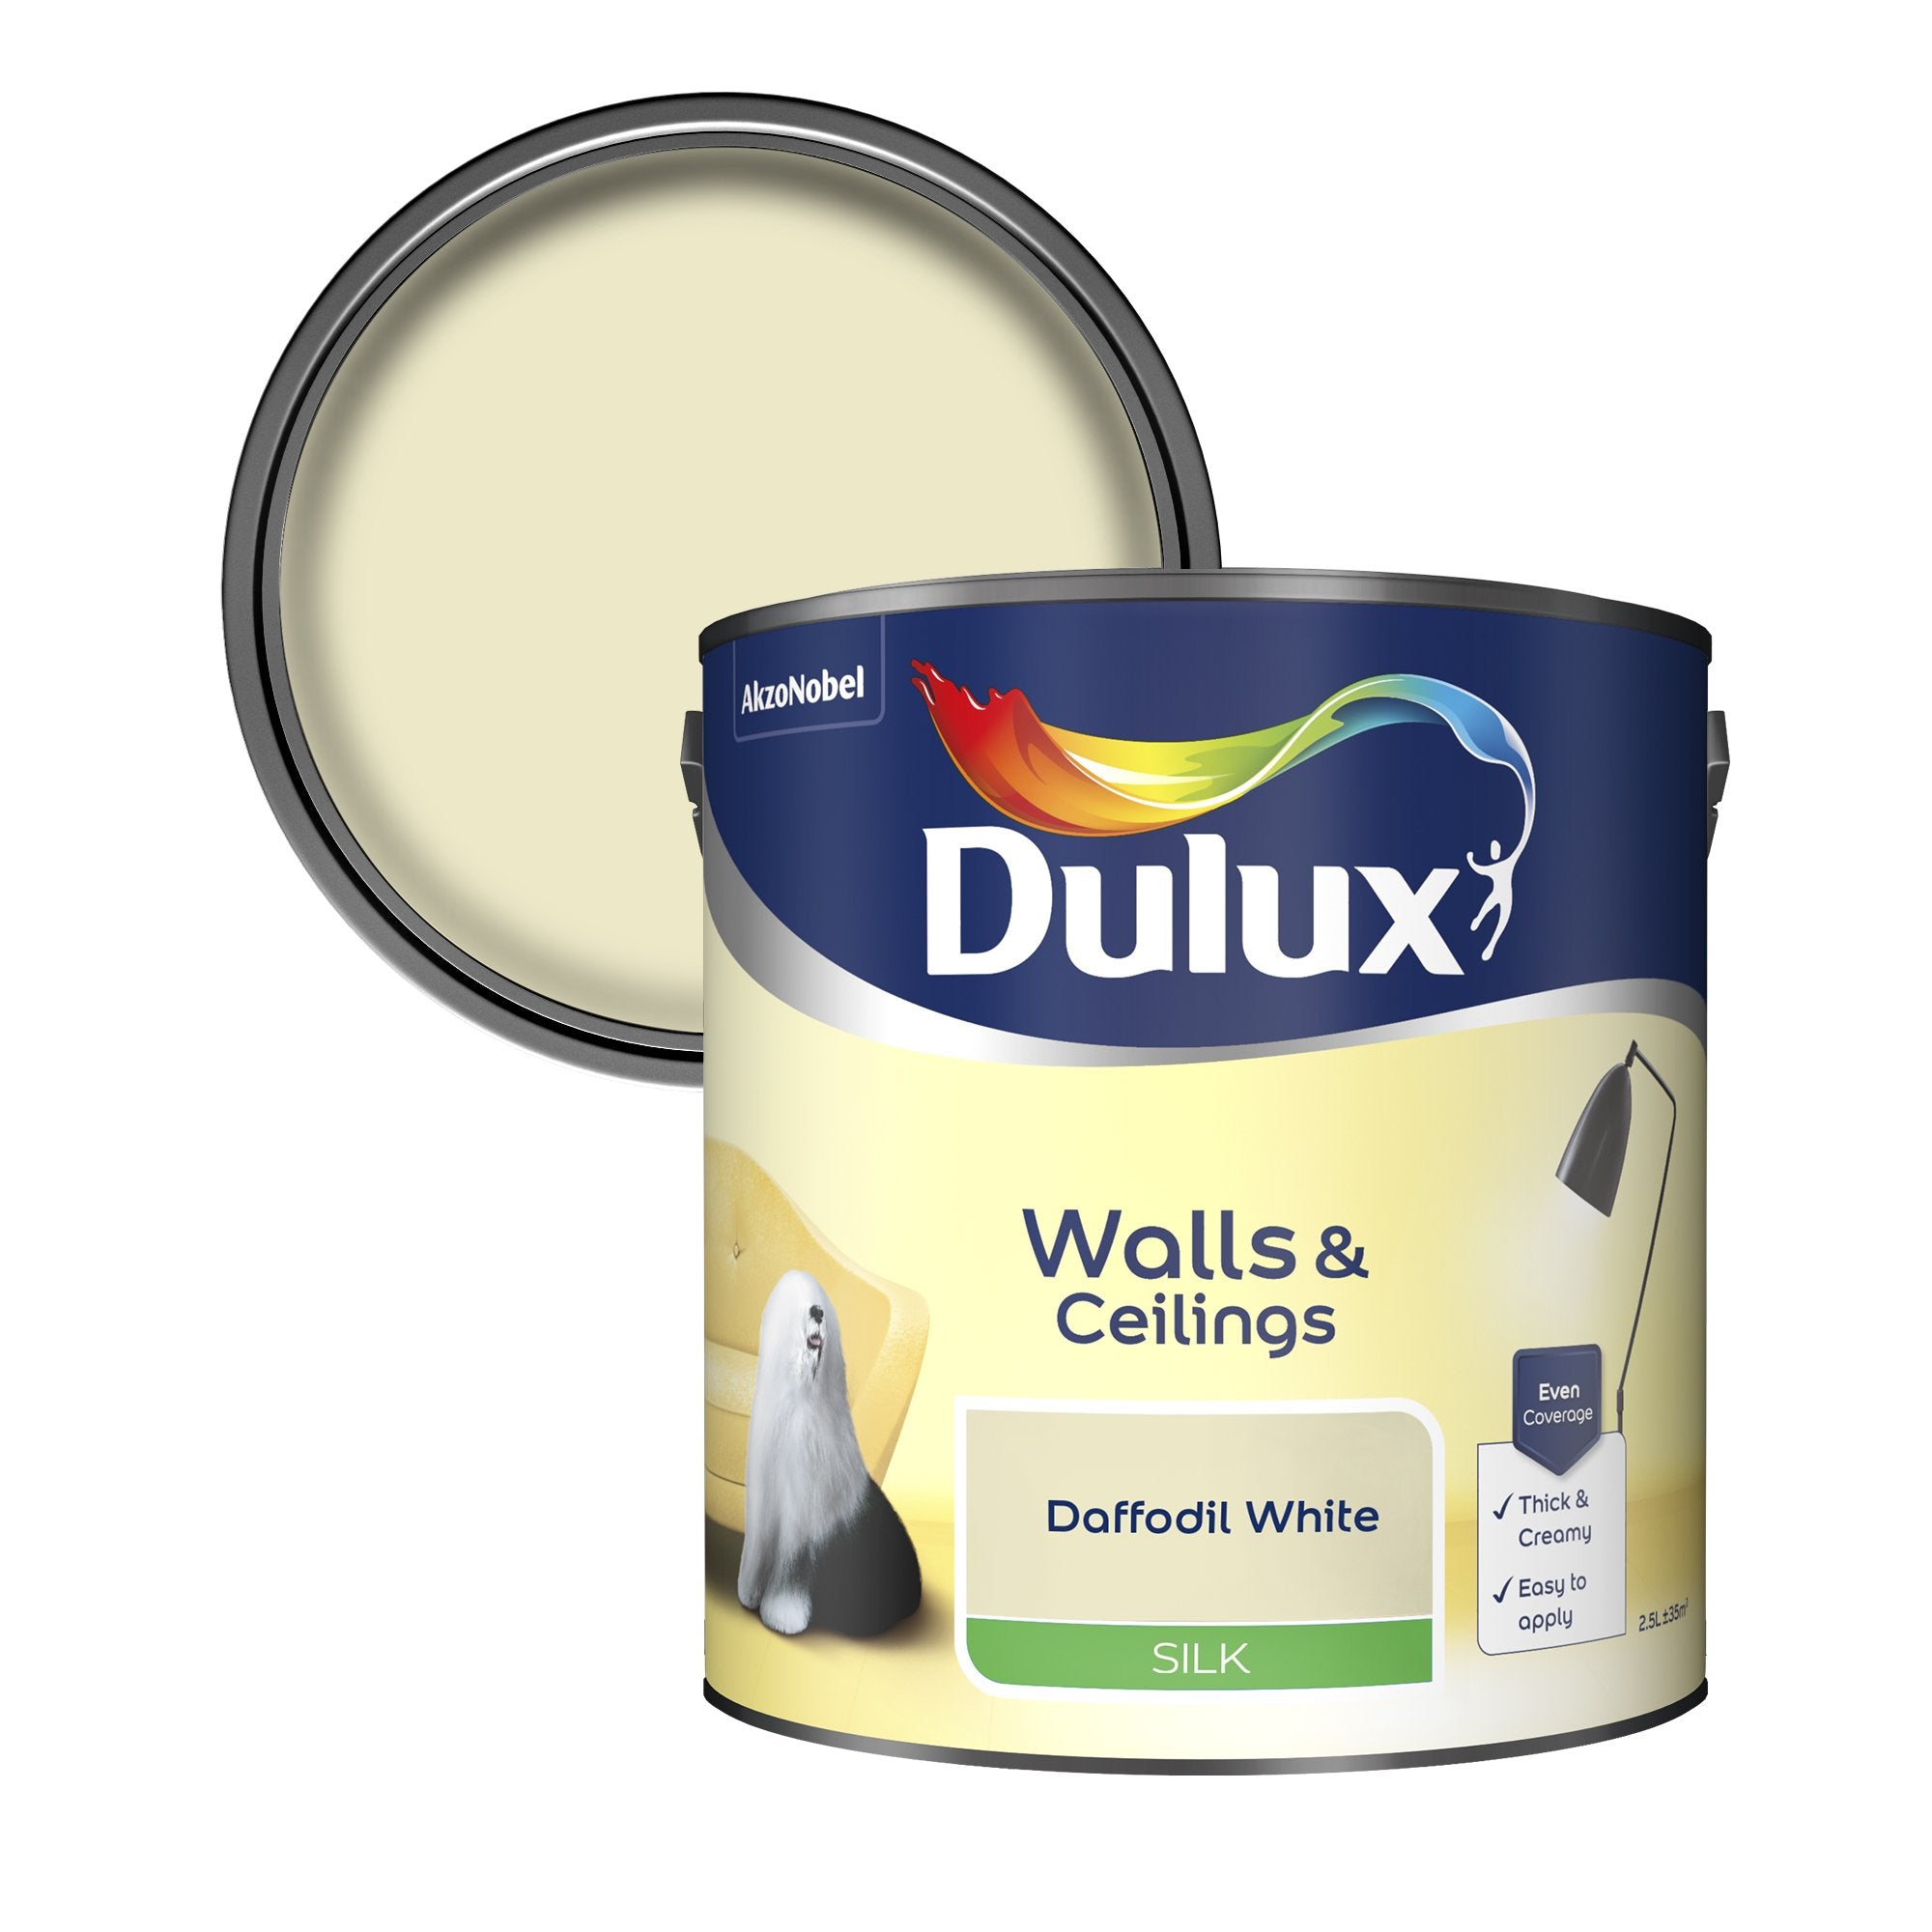 Dulux-Silk-Emulsion-Paint-For-Walls-And-Ceilings-Daffodil-White-2.5L